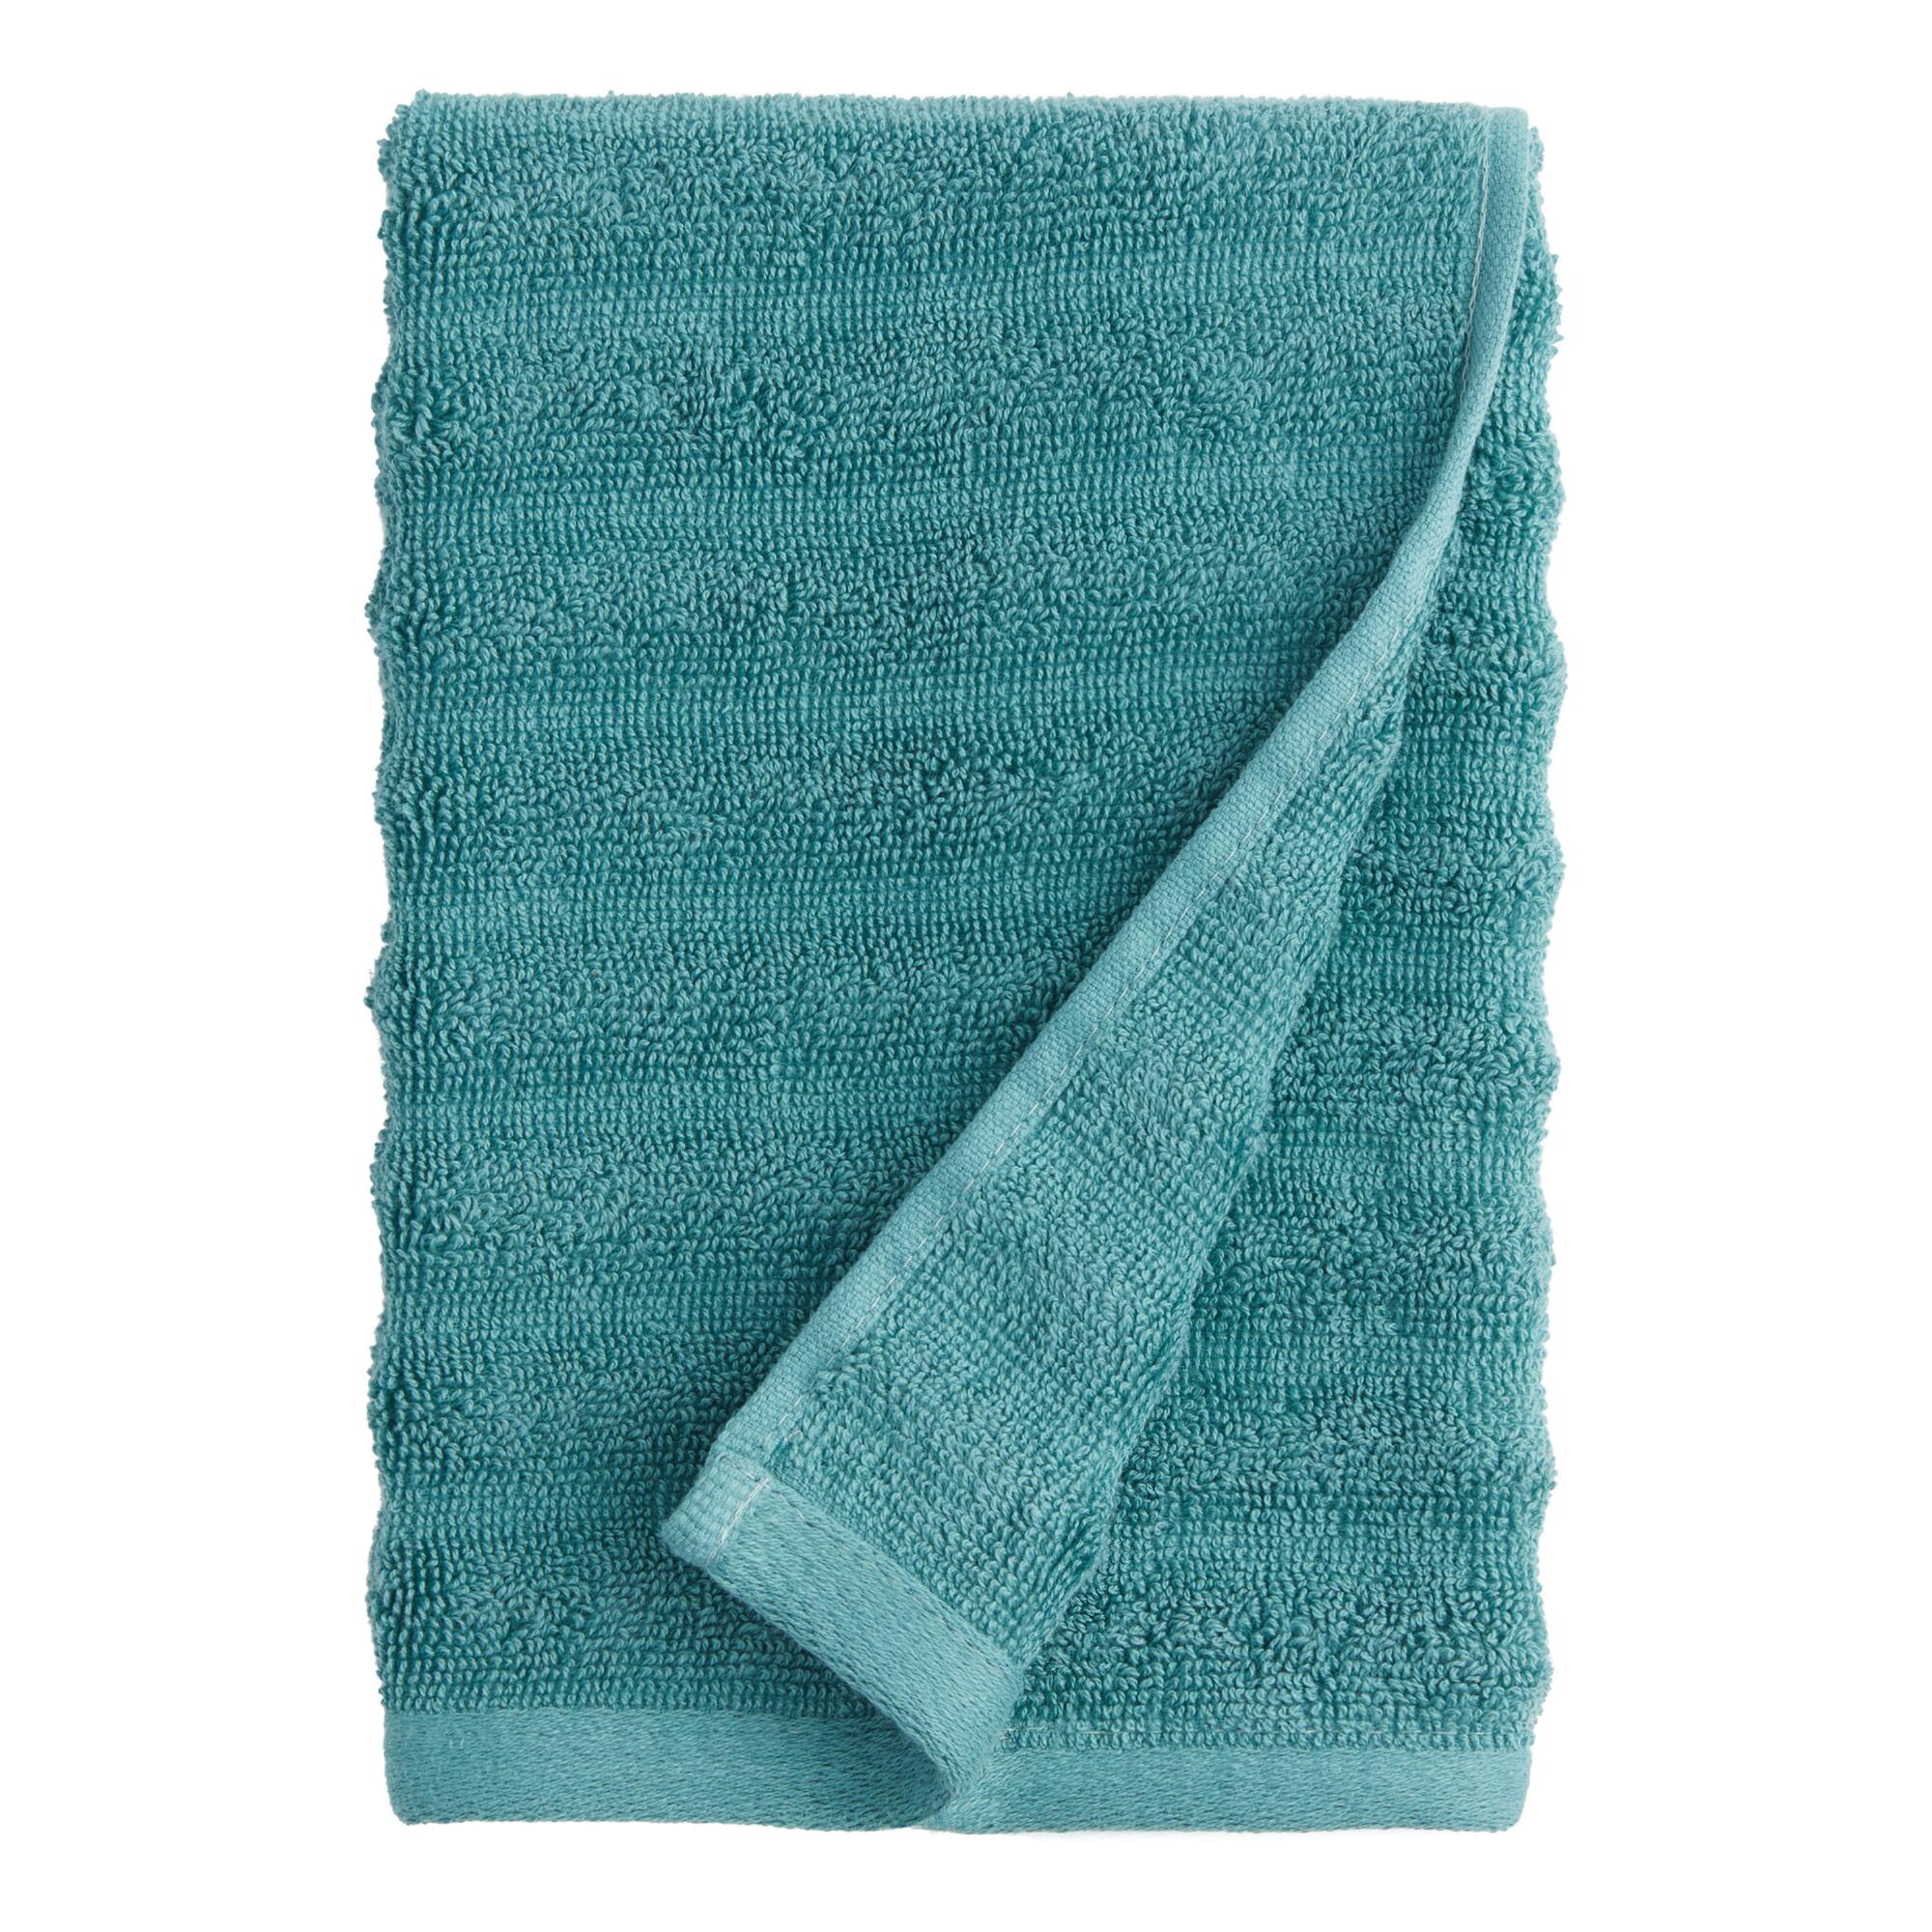 Mineral Blue Sculpted Wave Hand Towel by World Market